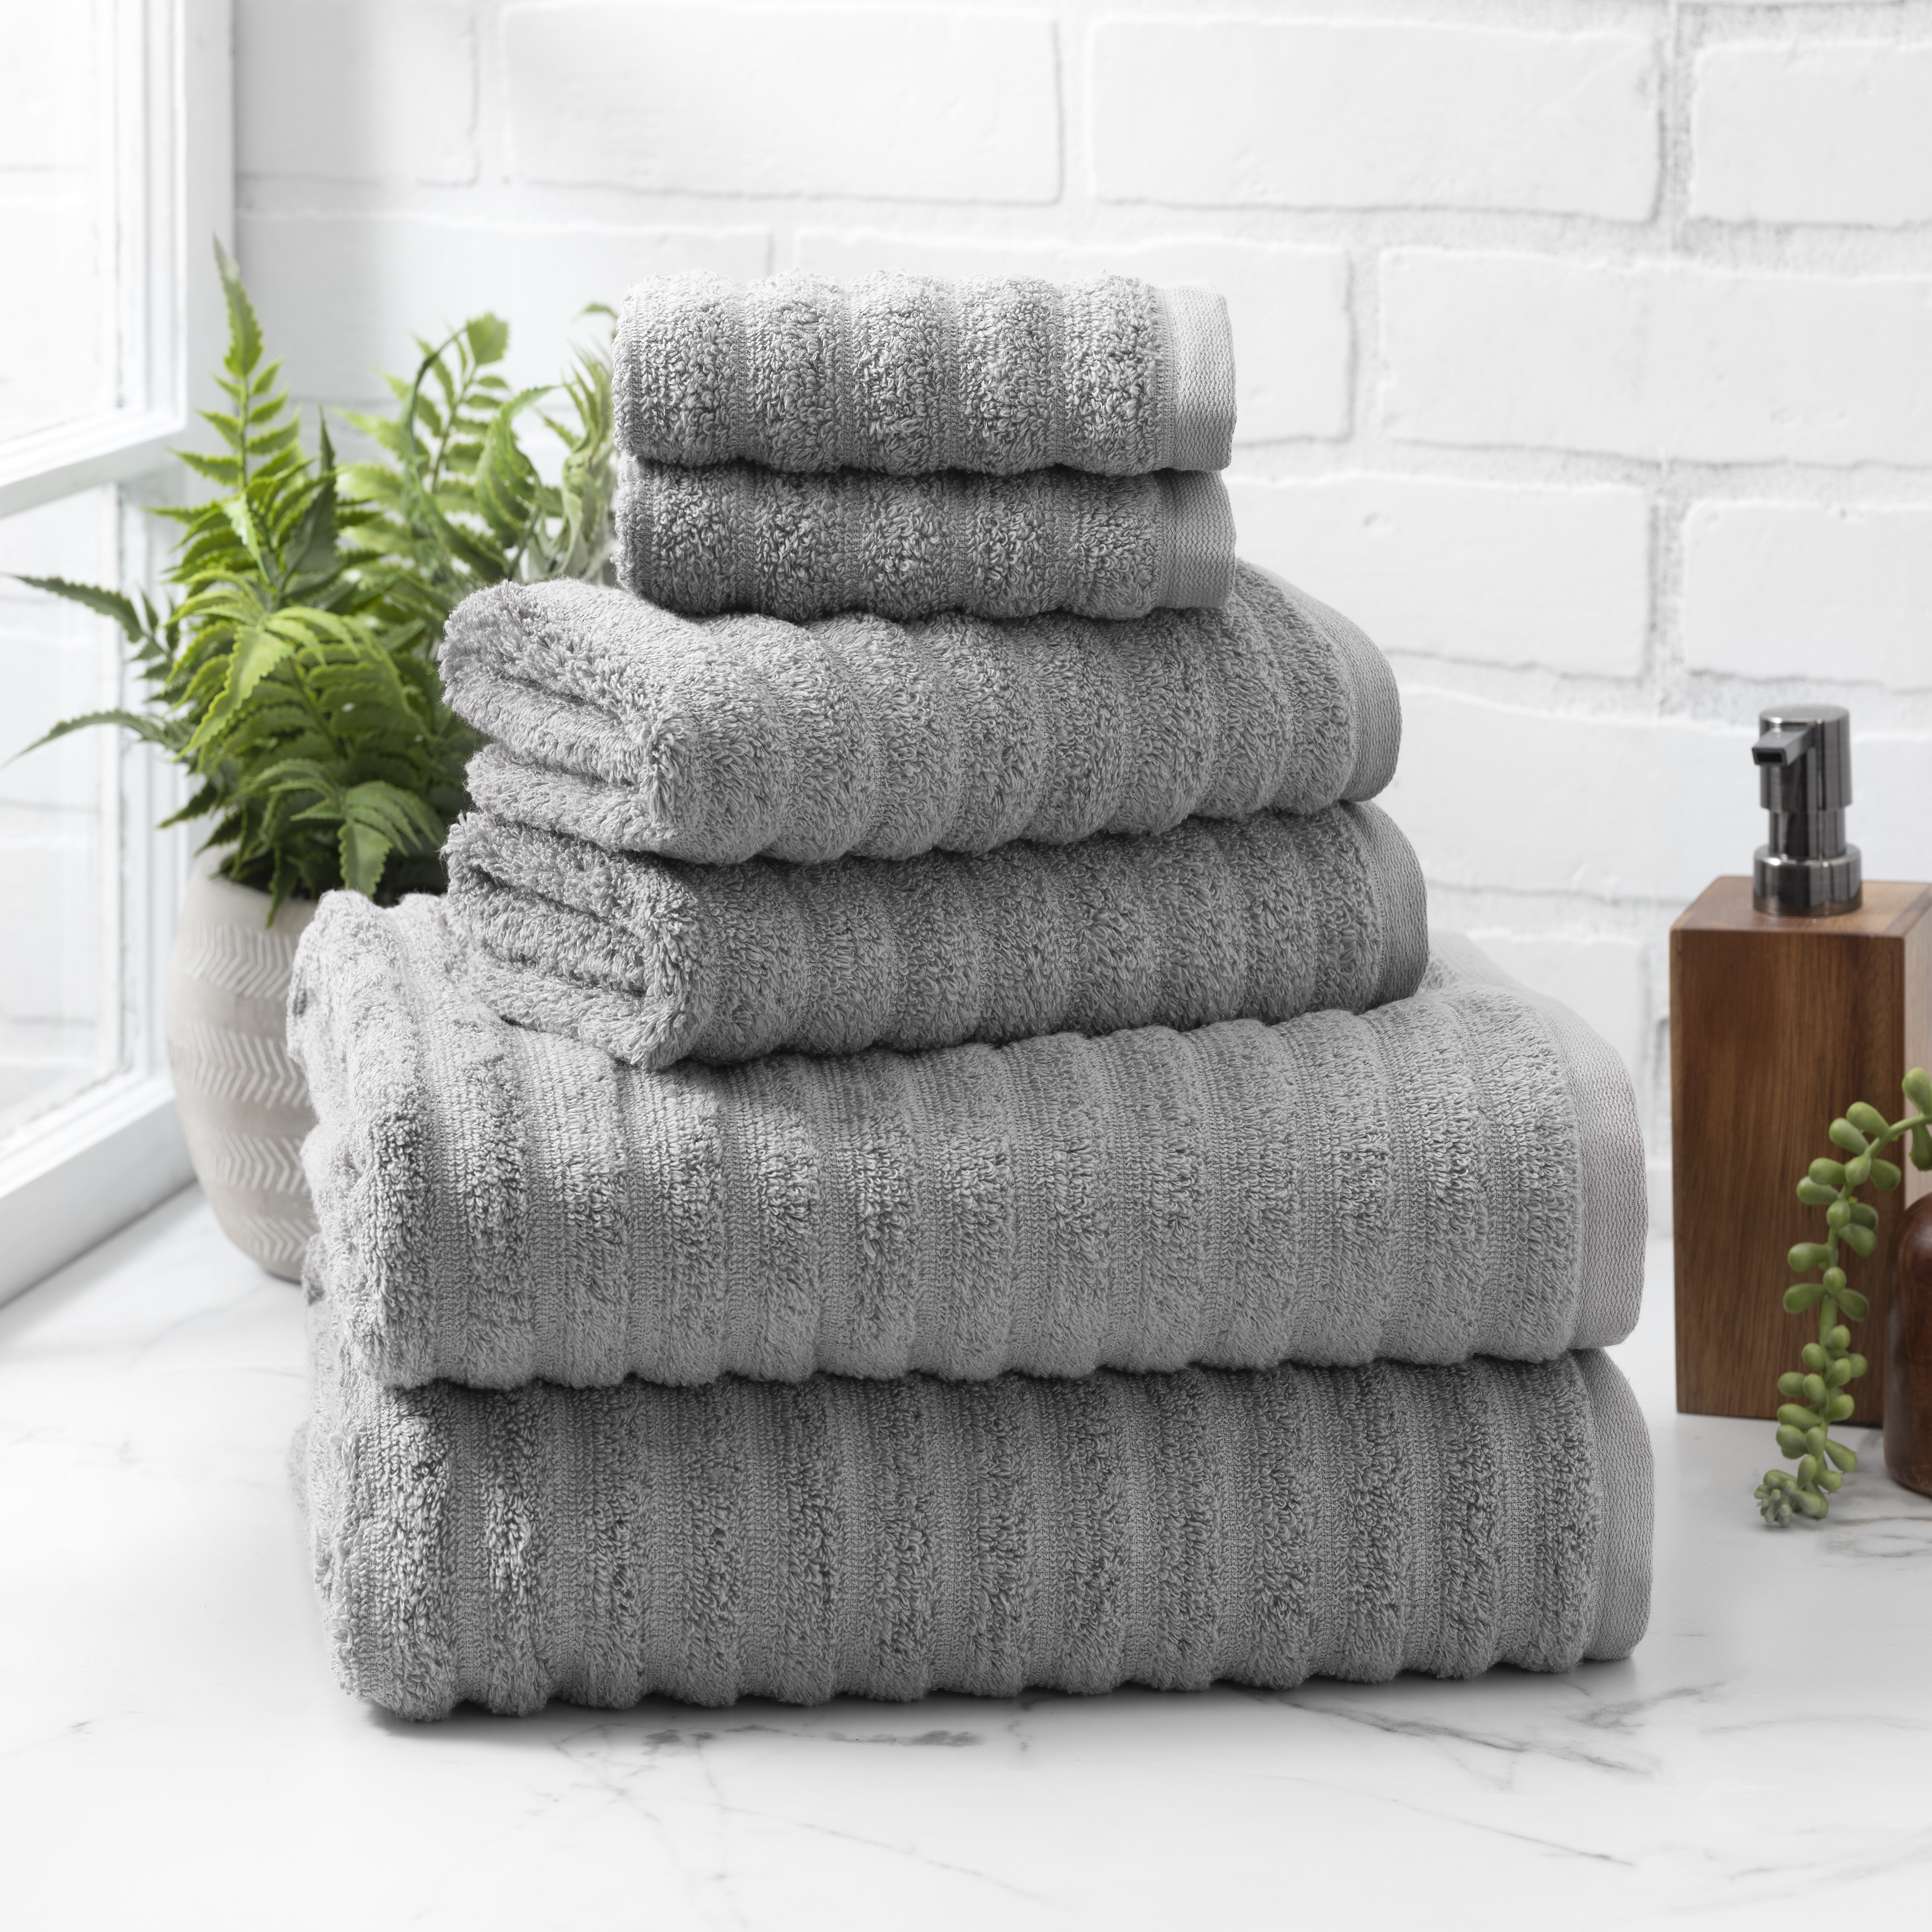 Mainstays Performance 6-Piece Towel set, Textured Grey Flannel - image 1 of 7